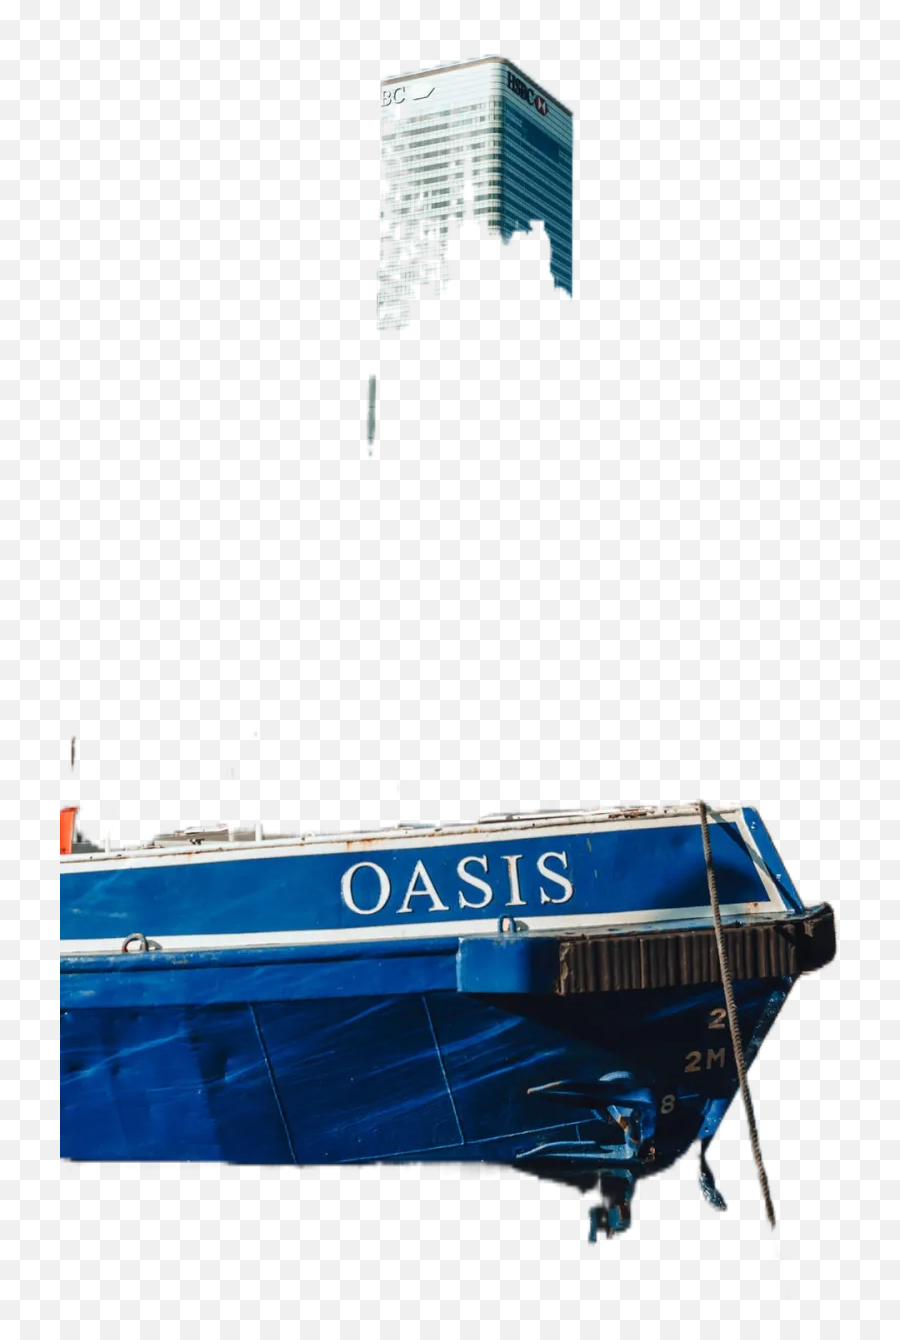 Blue And White Boat On Water Near City Buildings During Emoji,City Transparent Background